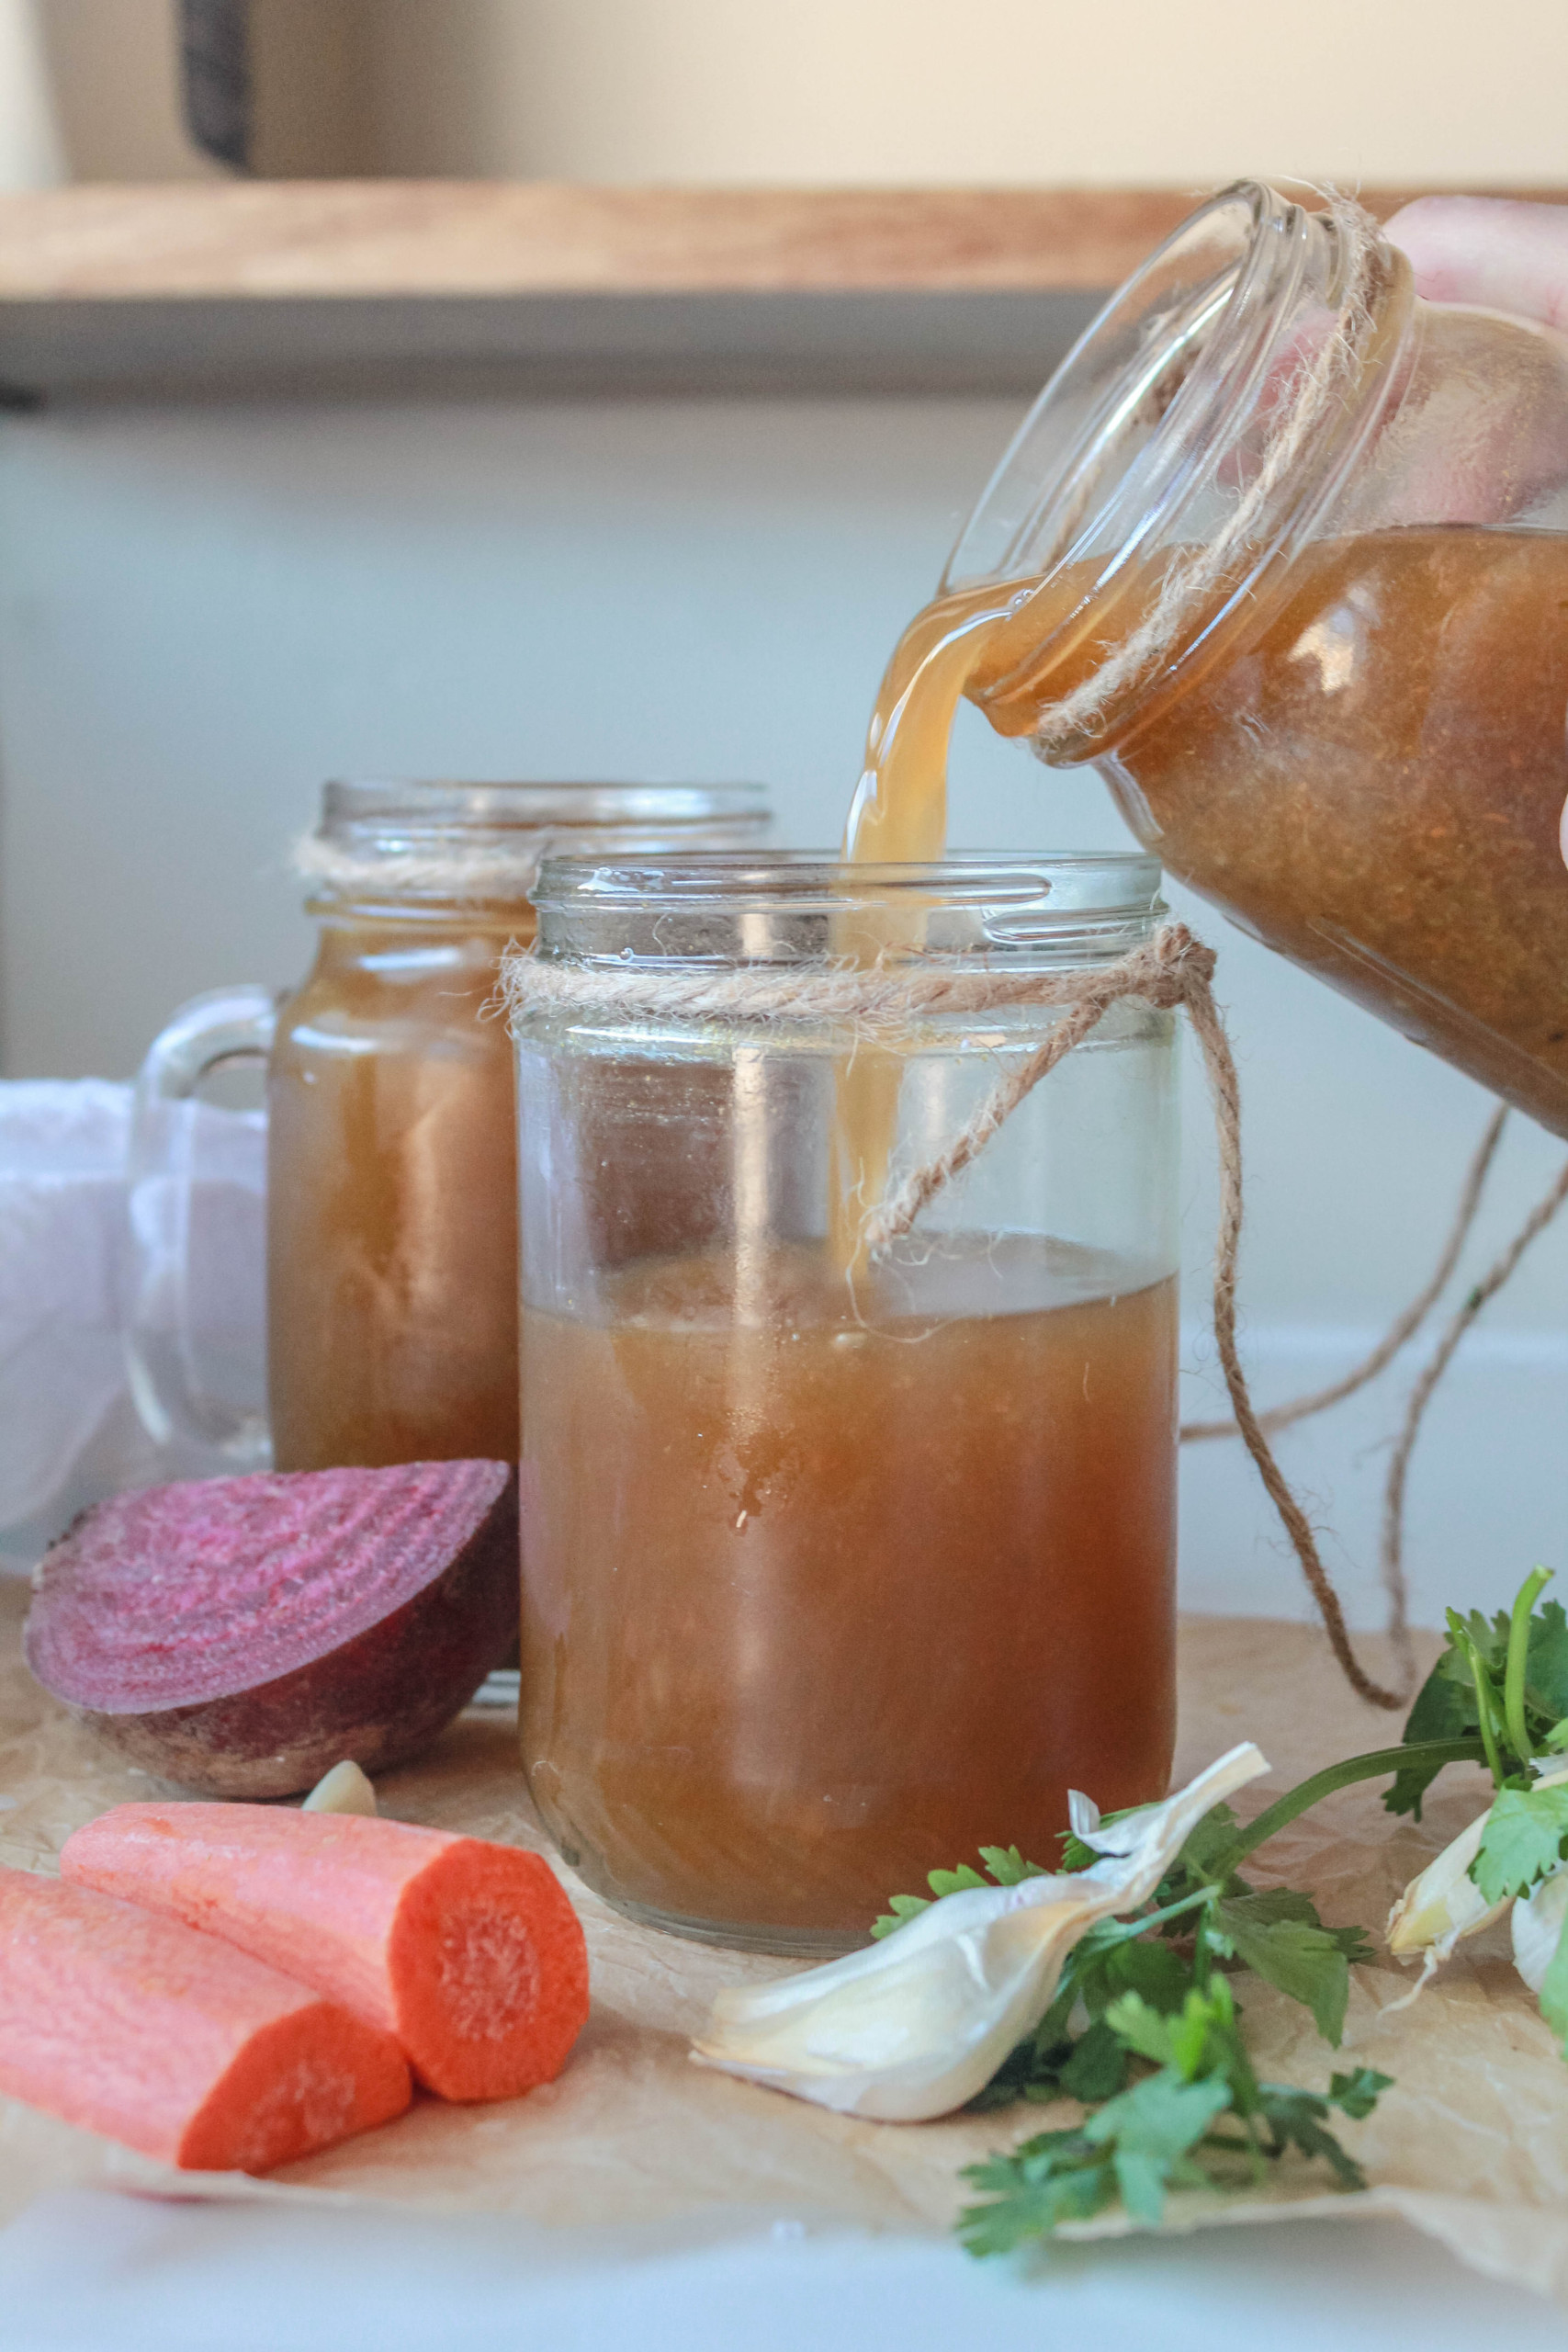 Easy Vegetable Stock From Scraps